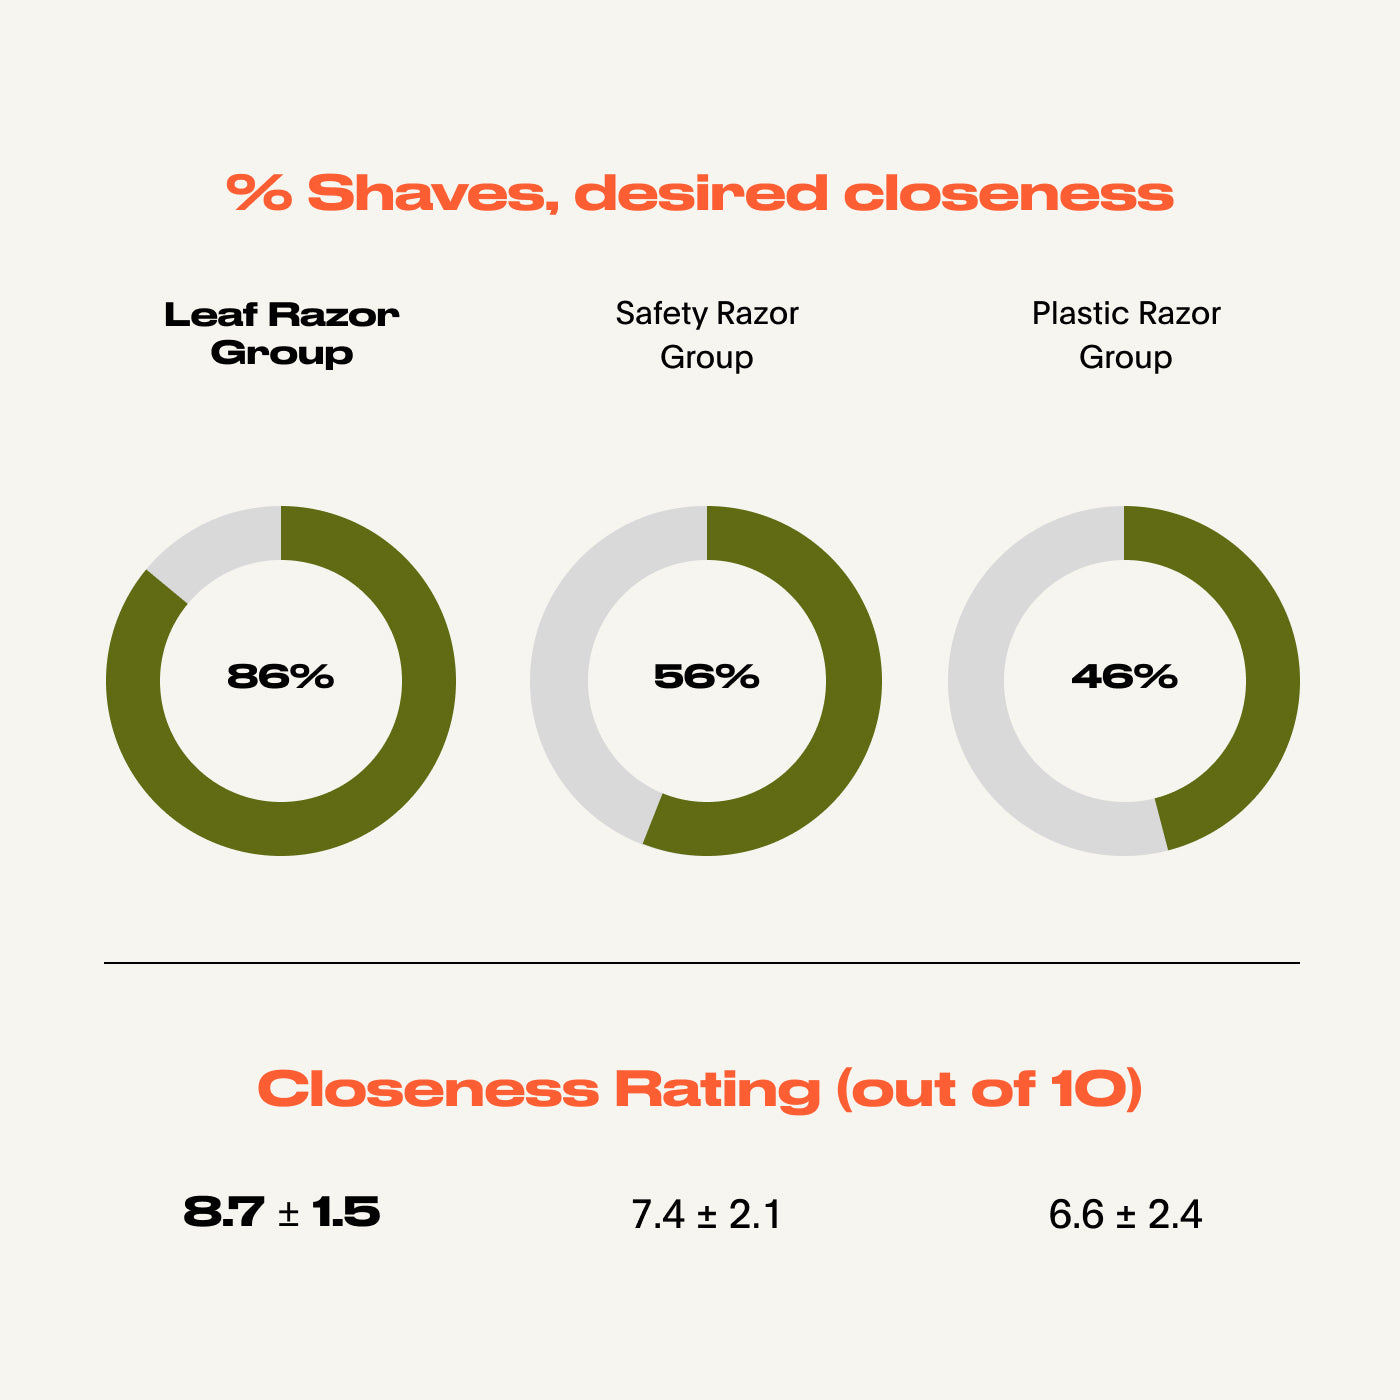 Graphic showing the percent of shaves achieving the user's desired level of closeness. Leaf Razor Group: 86%; Safety Razor Group: 56%; Plastic Razor Group: 46%